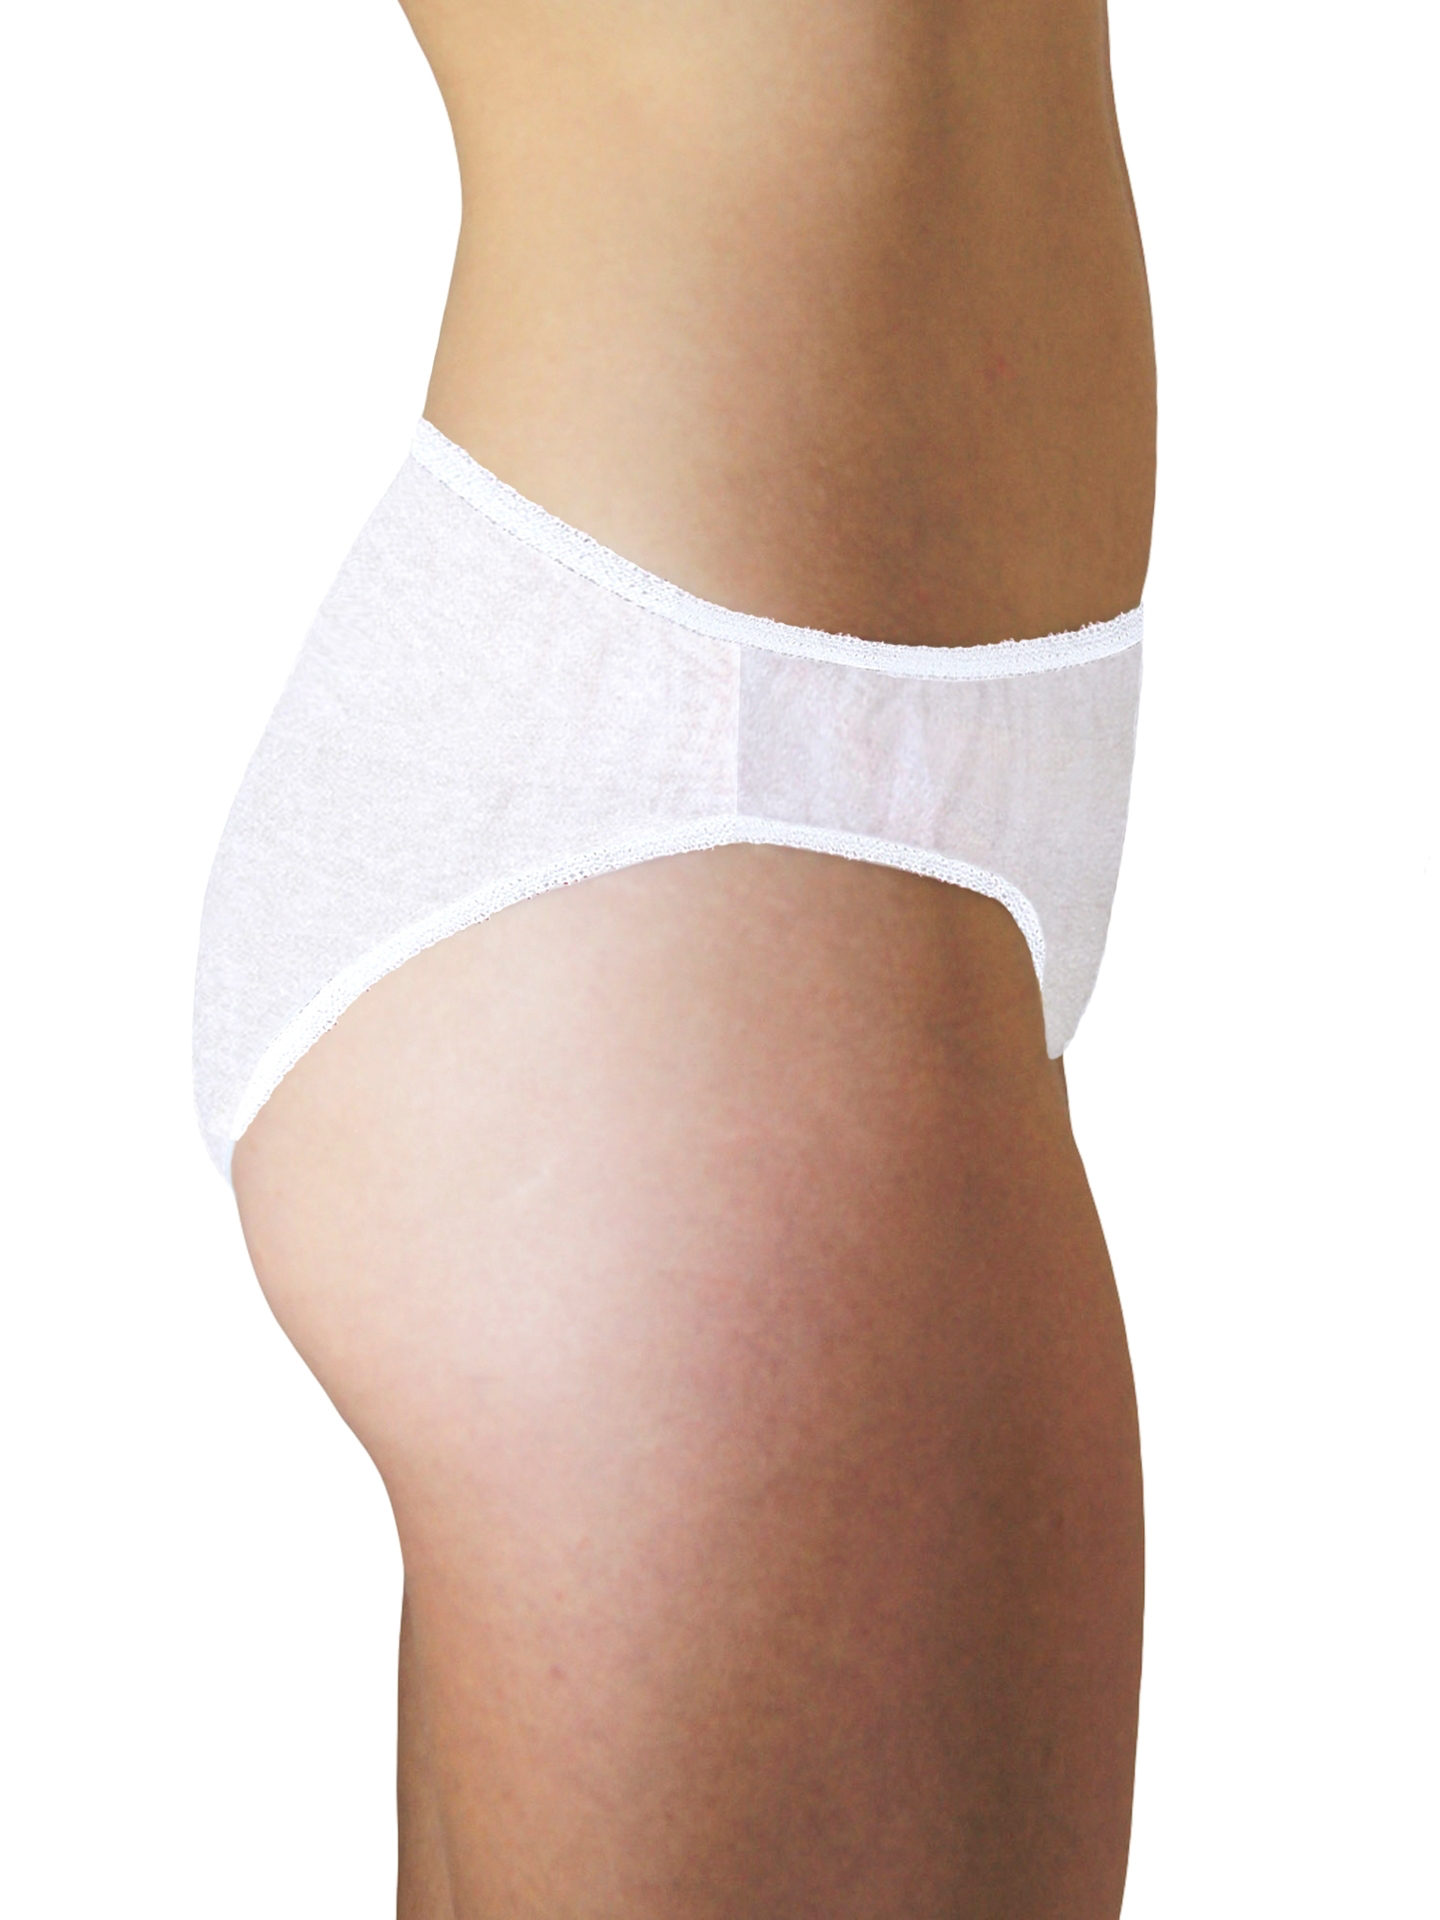 Pack of 5 Women' Cotton Disposable Underwear Maternity Travel Panties